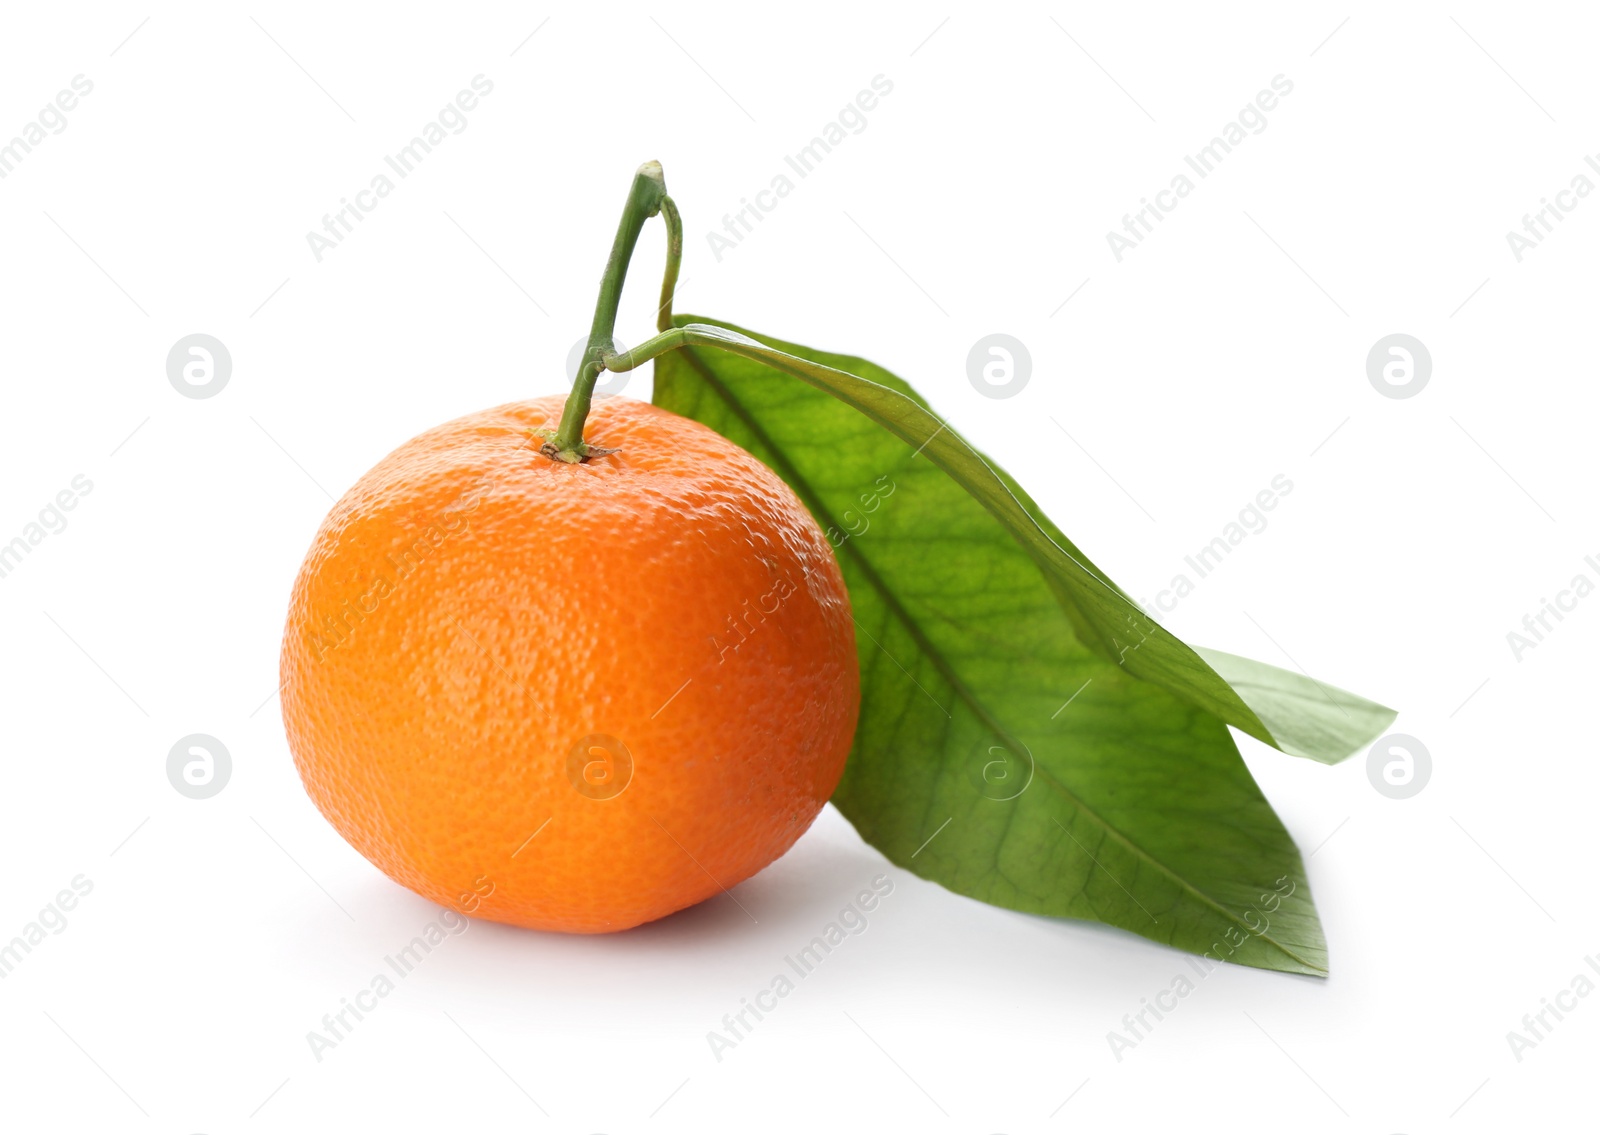 Photo of Whole fresh tangerine with green leaves isolated on white